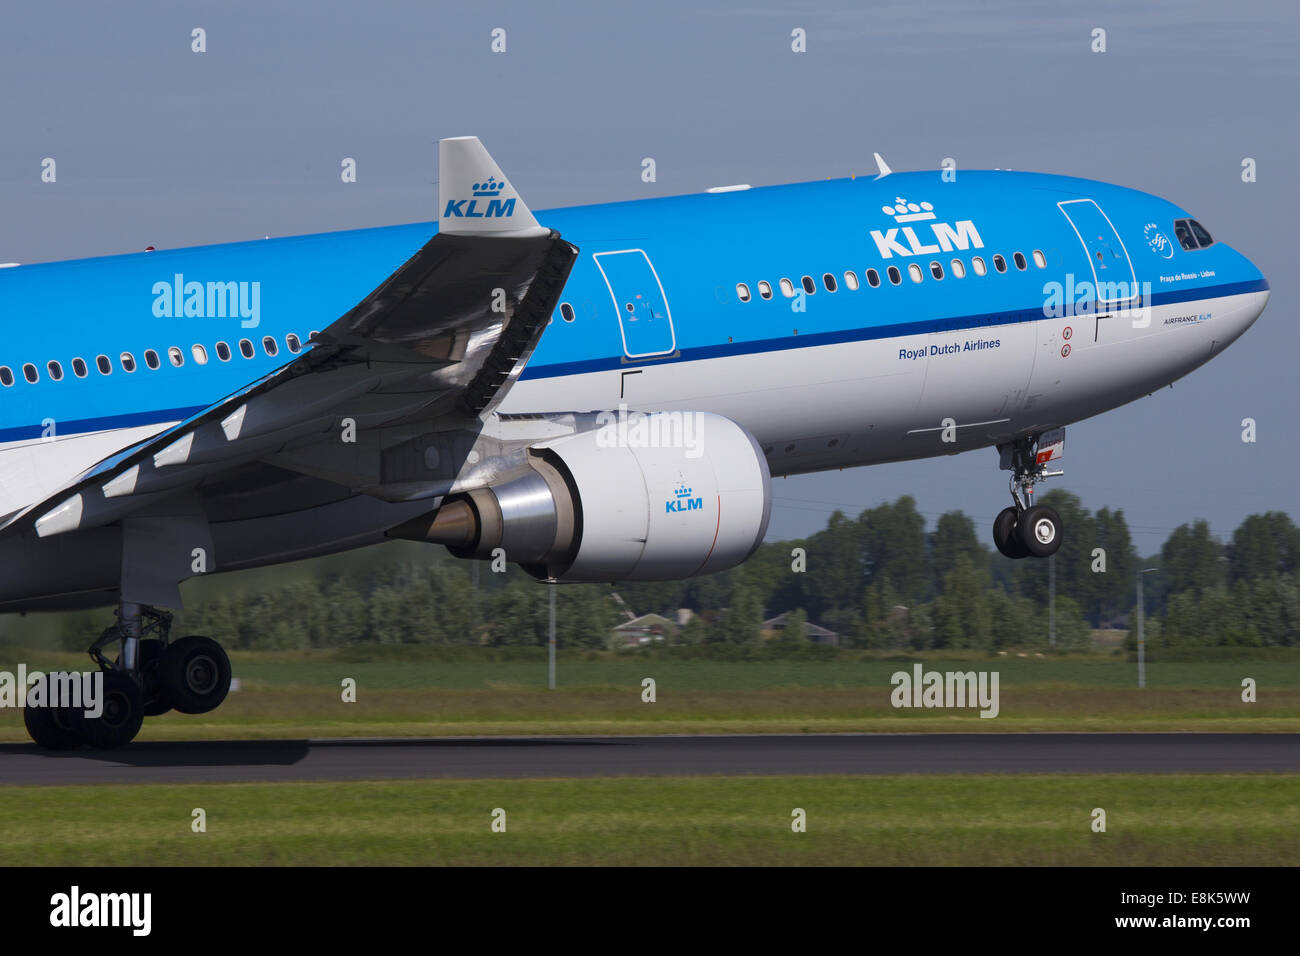 KLM Royal Dutch Airlines Airbus A330 departure Stock Photo